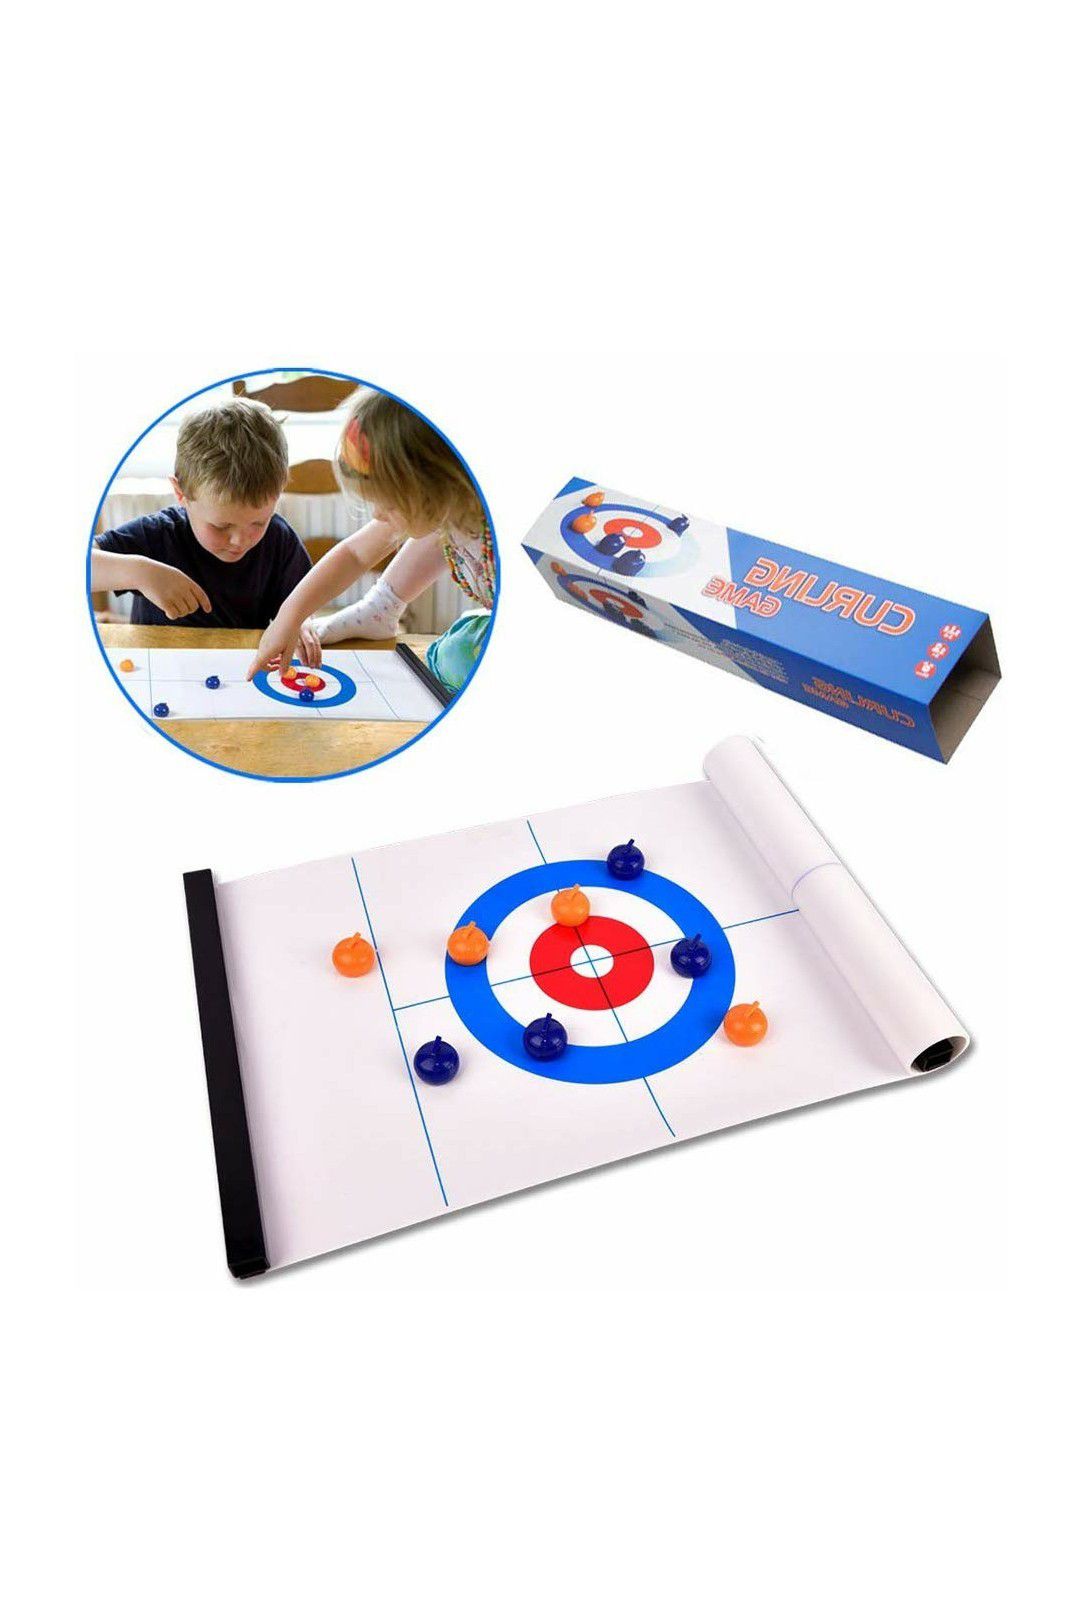 GEHARTY Tabletop Curling Game, Compact Curling Family Board Games for Kids and Adults Portable Mini Games